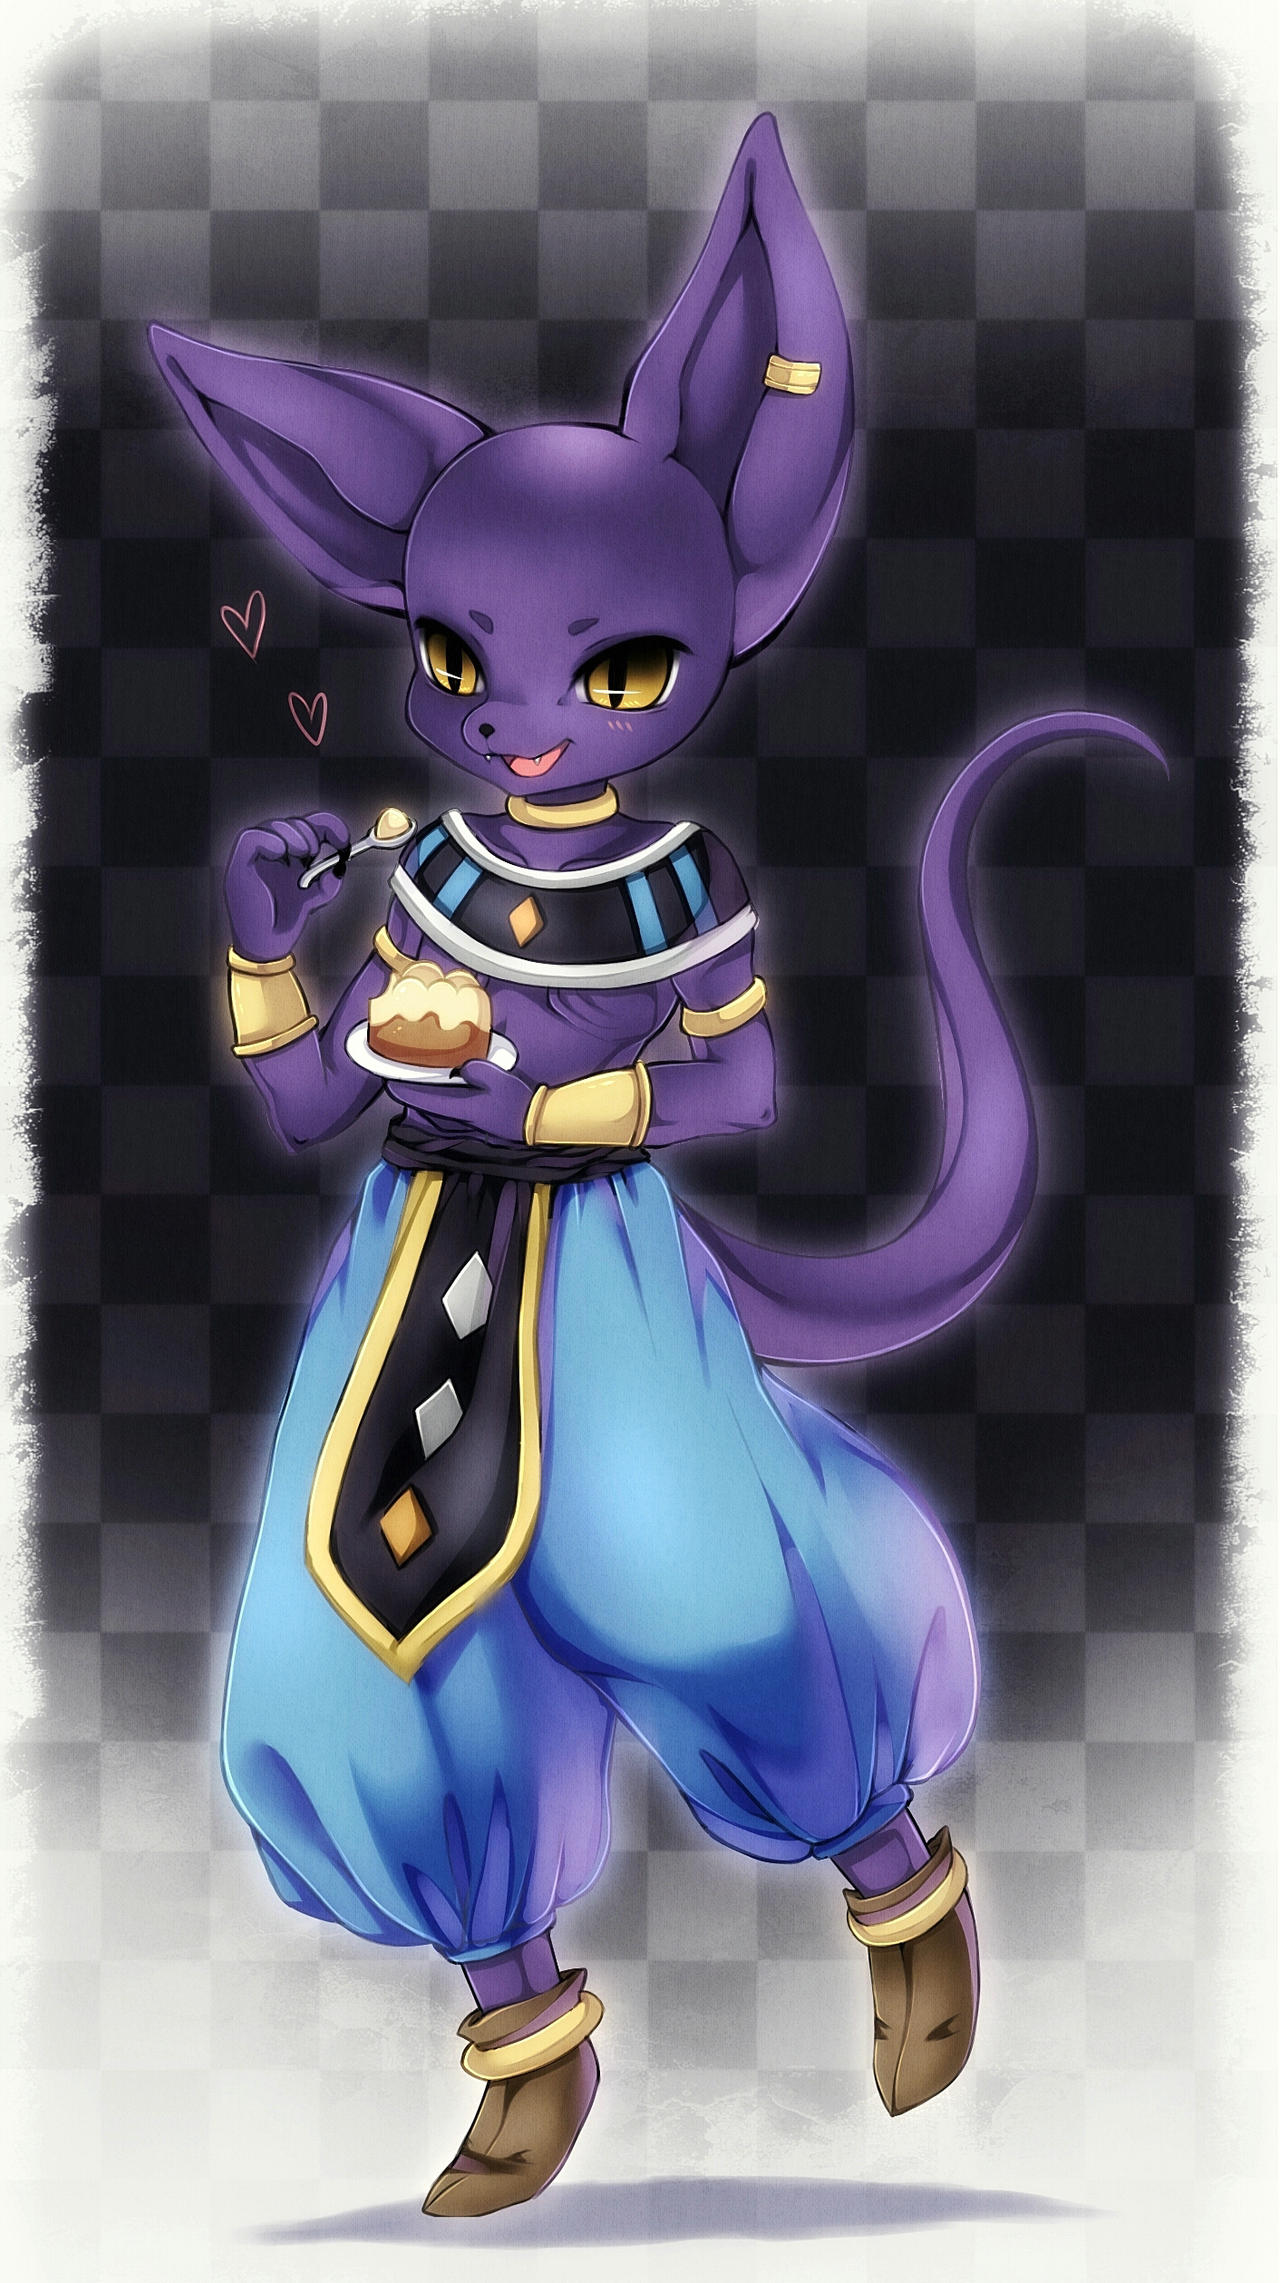 Pudding For Lord Beerus By Midna01 On Deviantart.